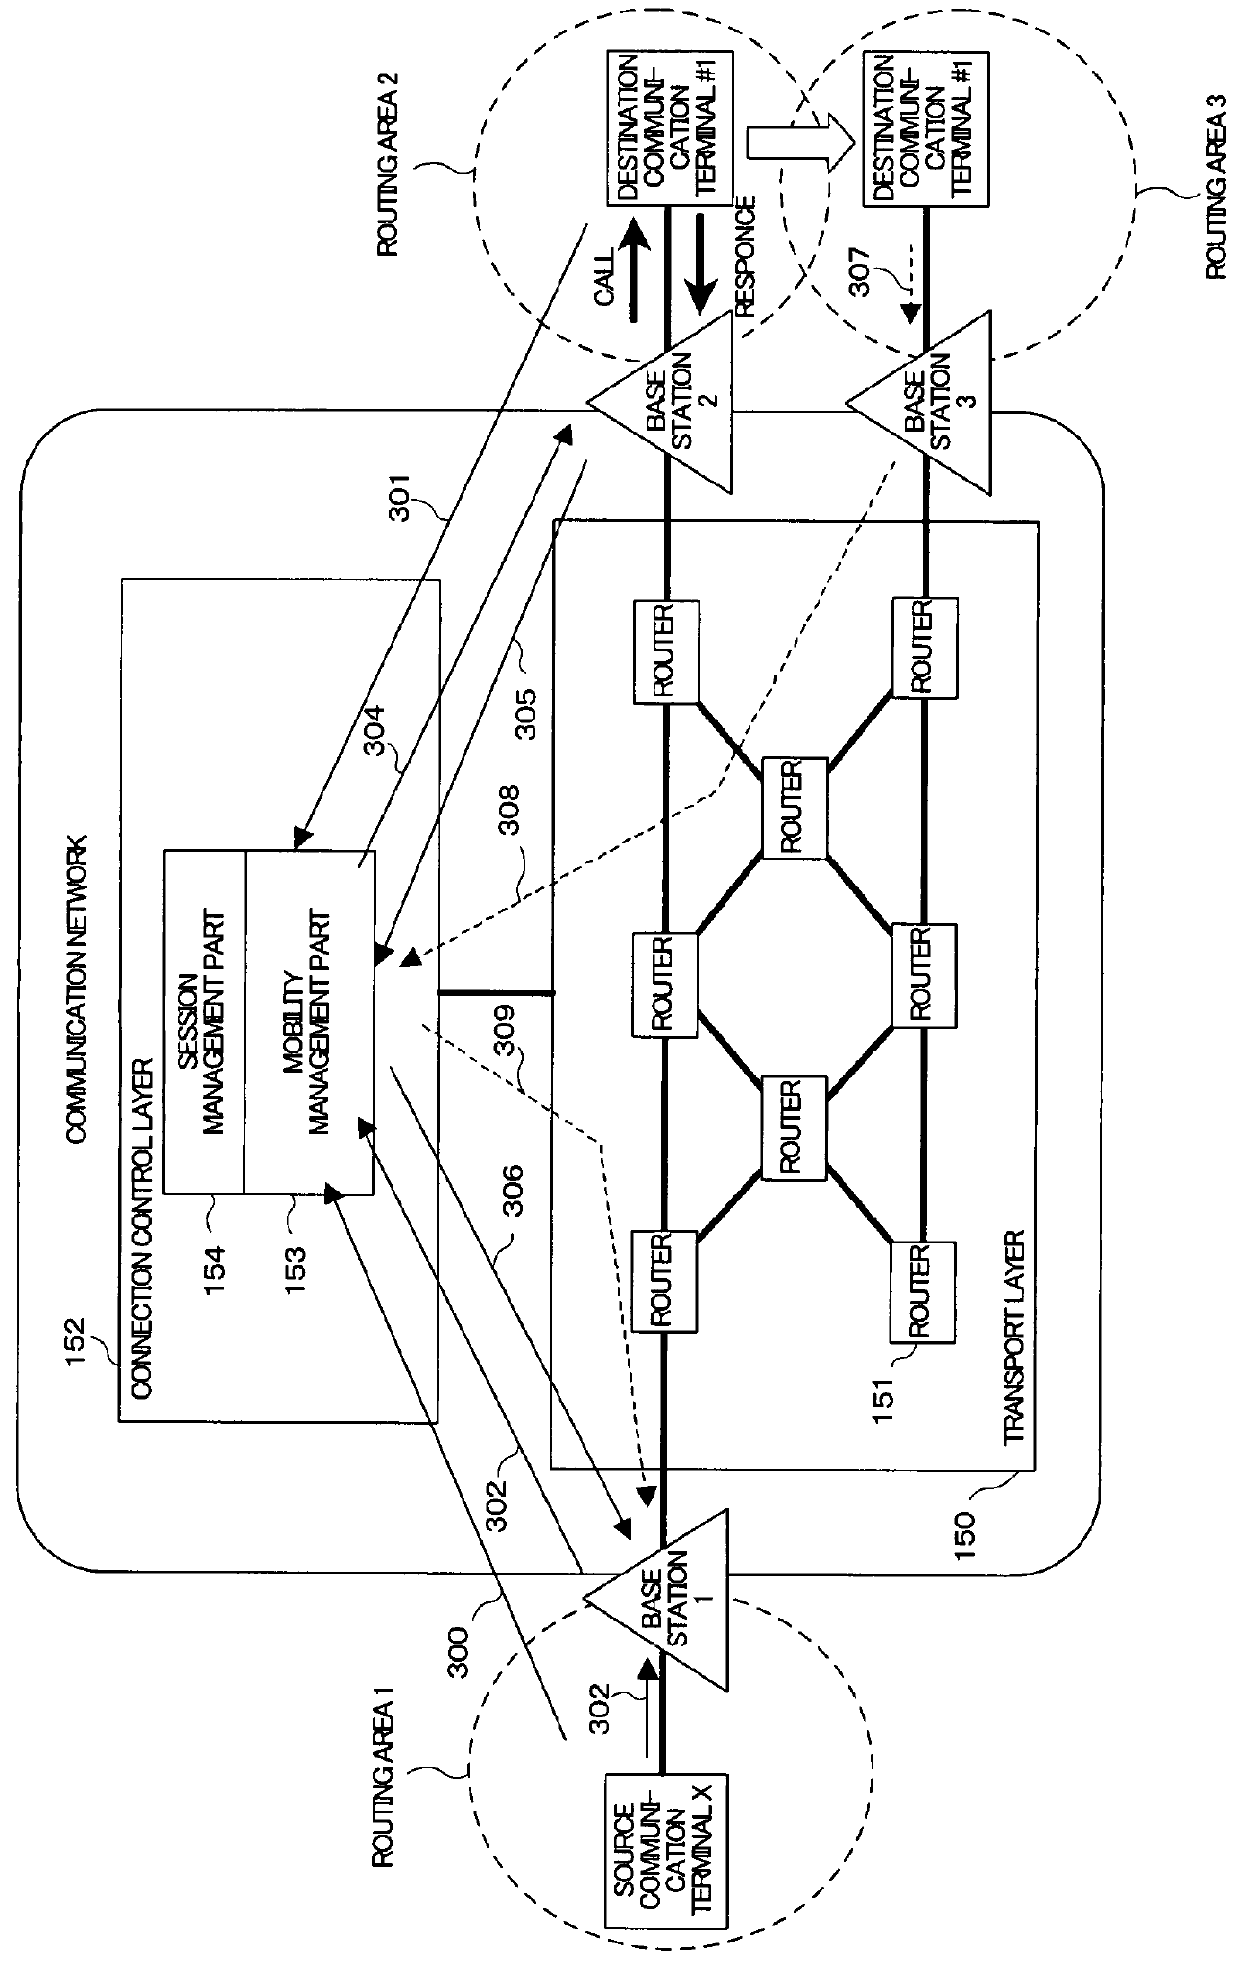 Control system of communication network